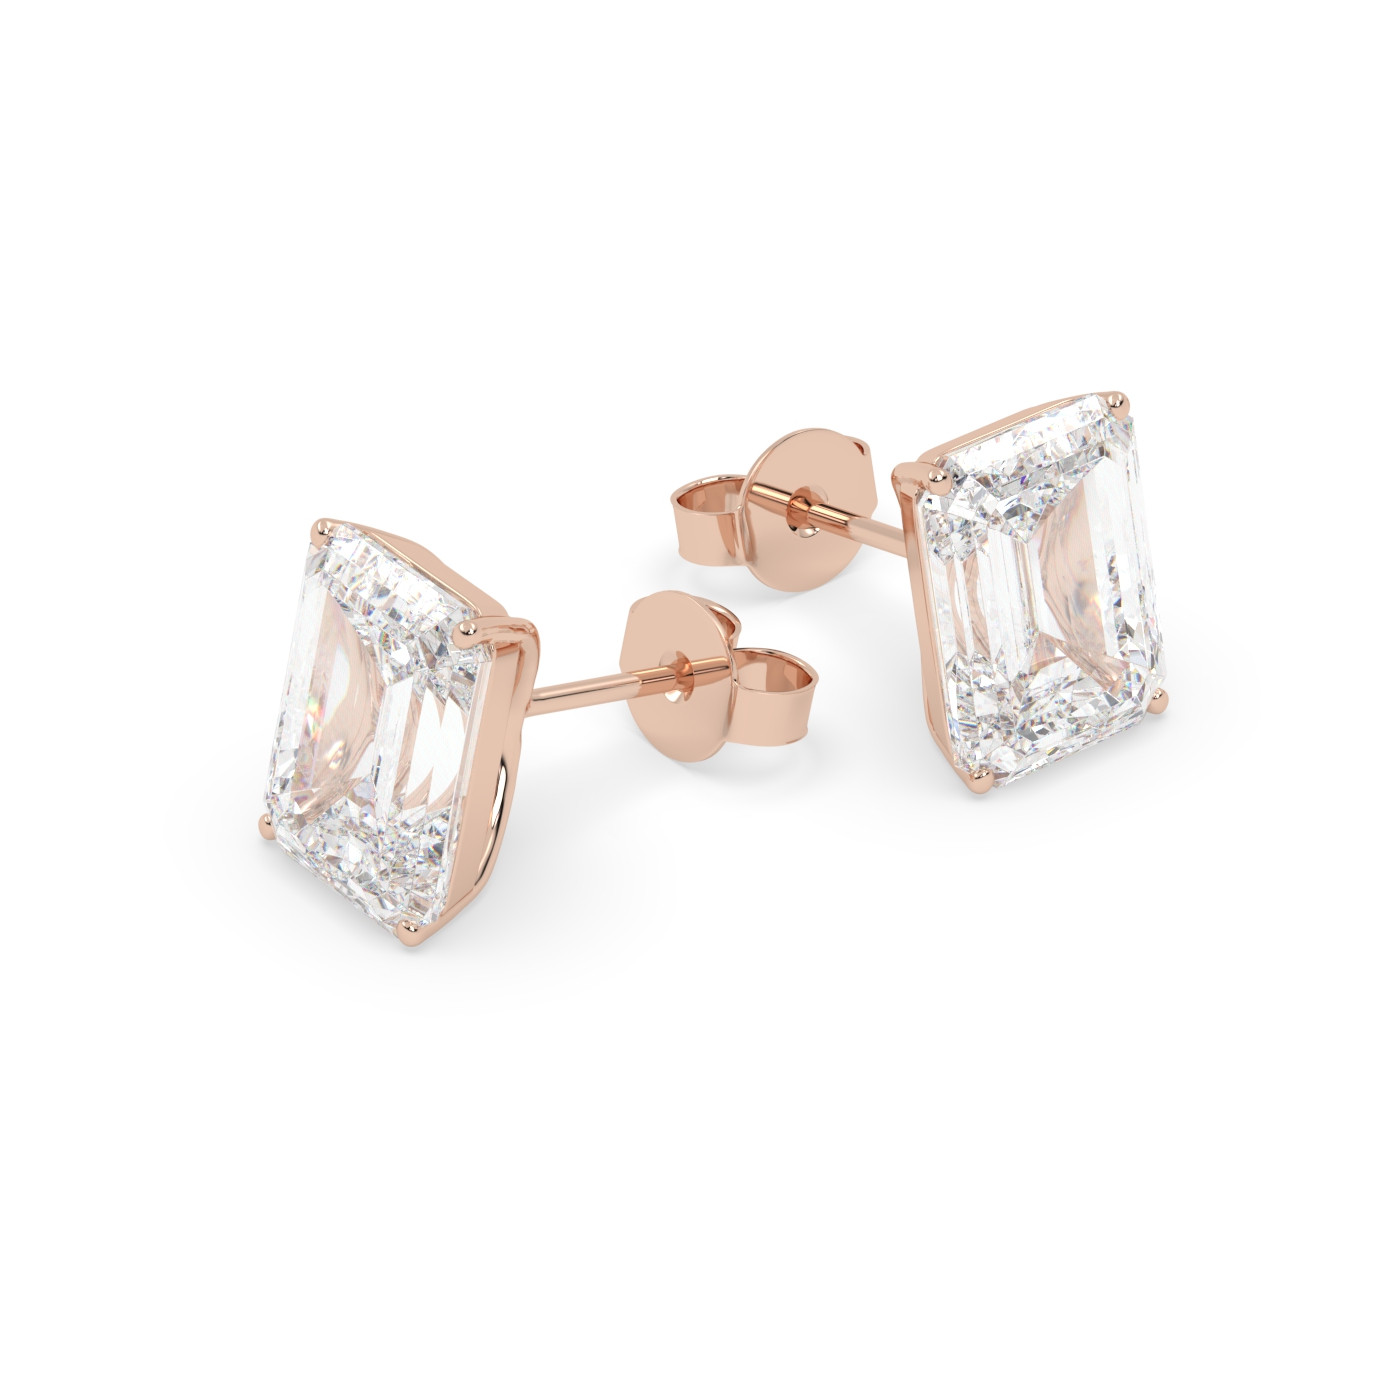 18K ROSE GOLD Emerald Stud Earrings with butterfly back